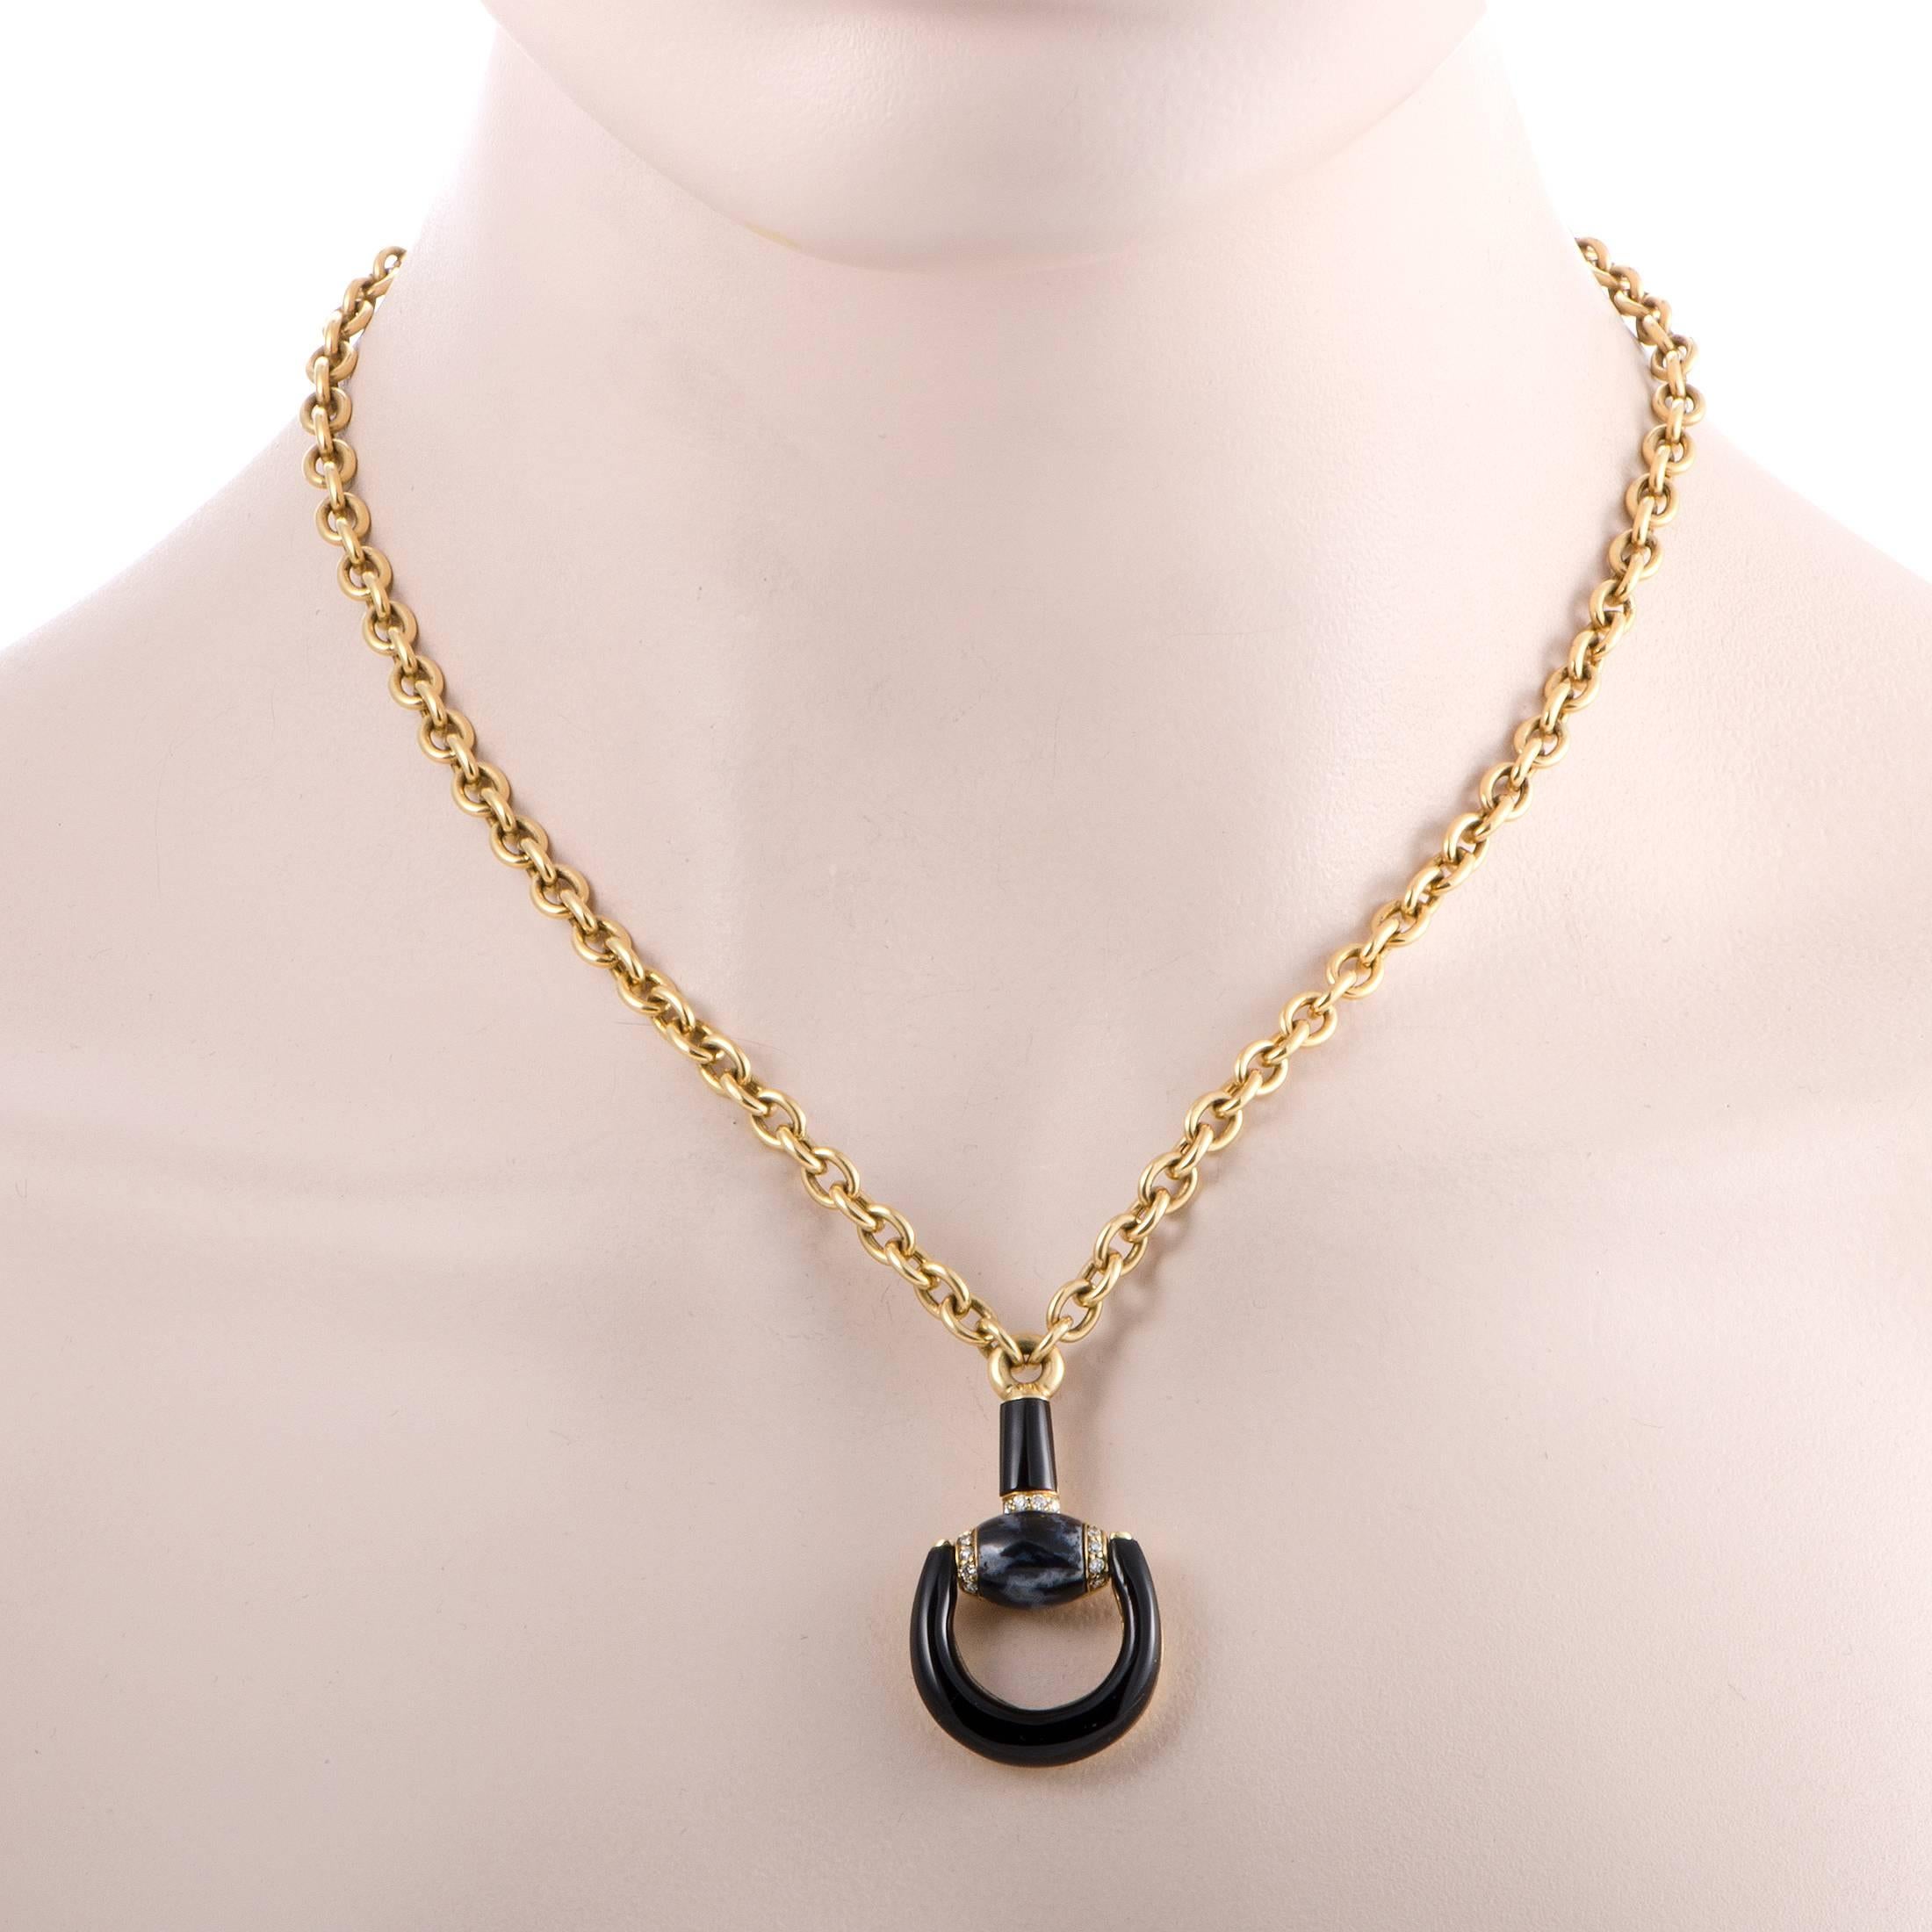 This boldly designed statement piece from Gucci is made of classy 18K yellow gold and features a captivating pendant in the form of the brand’s iconic motif. The eye-catching appeal of the pendant is achieved by combining striking black agate and